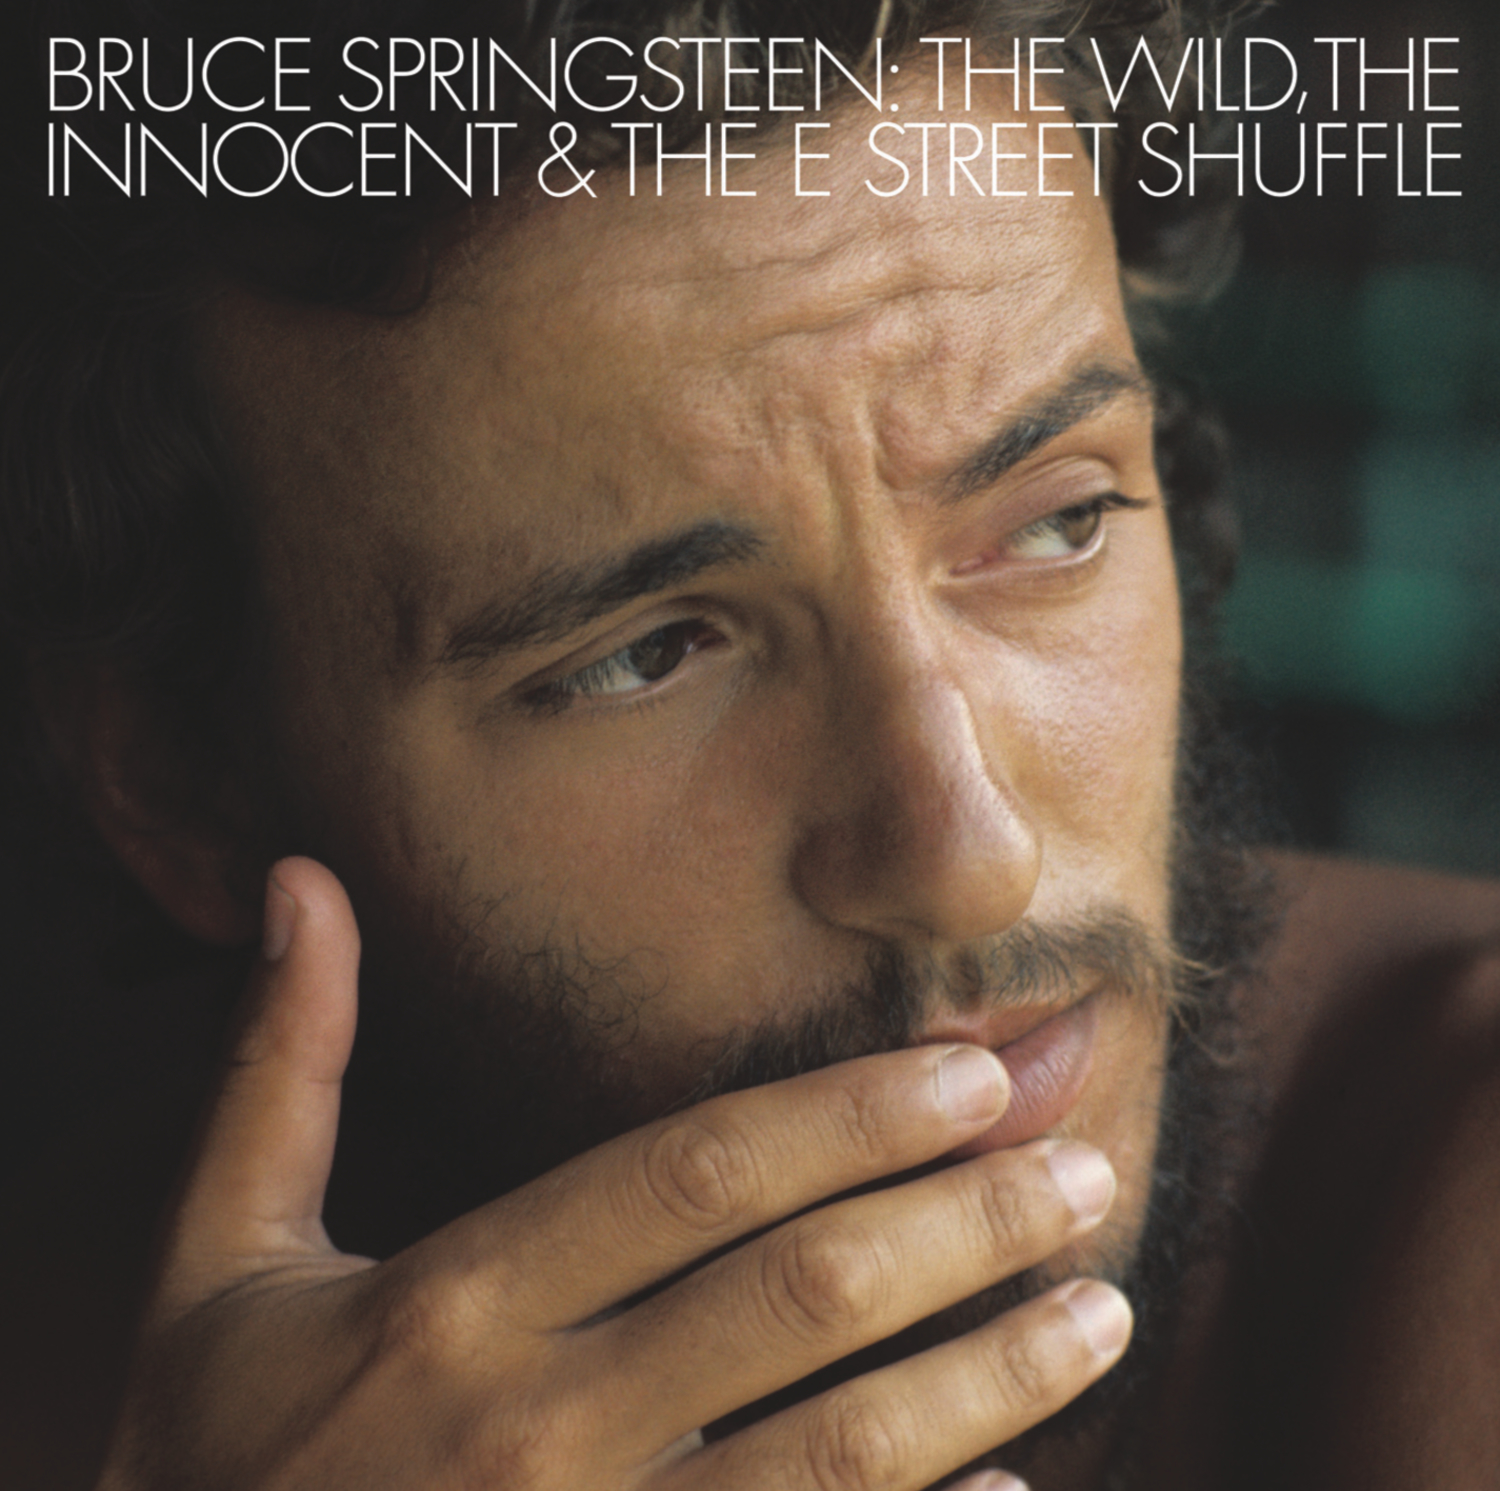 The Wild, The Innocent And The E Street Shuffle